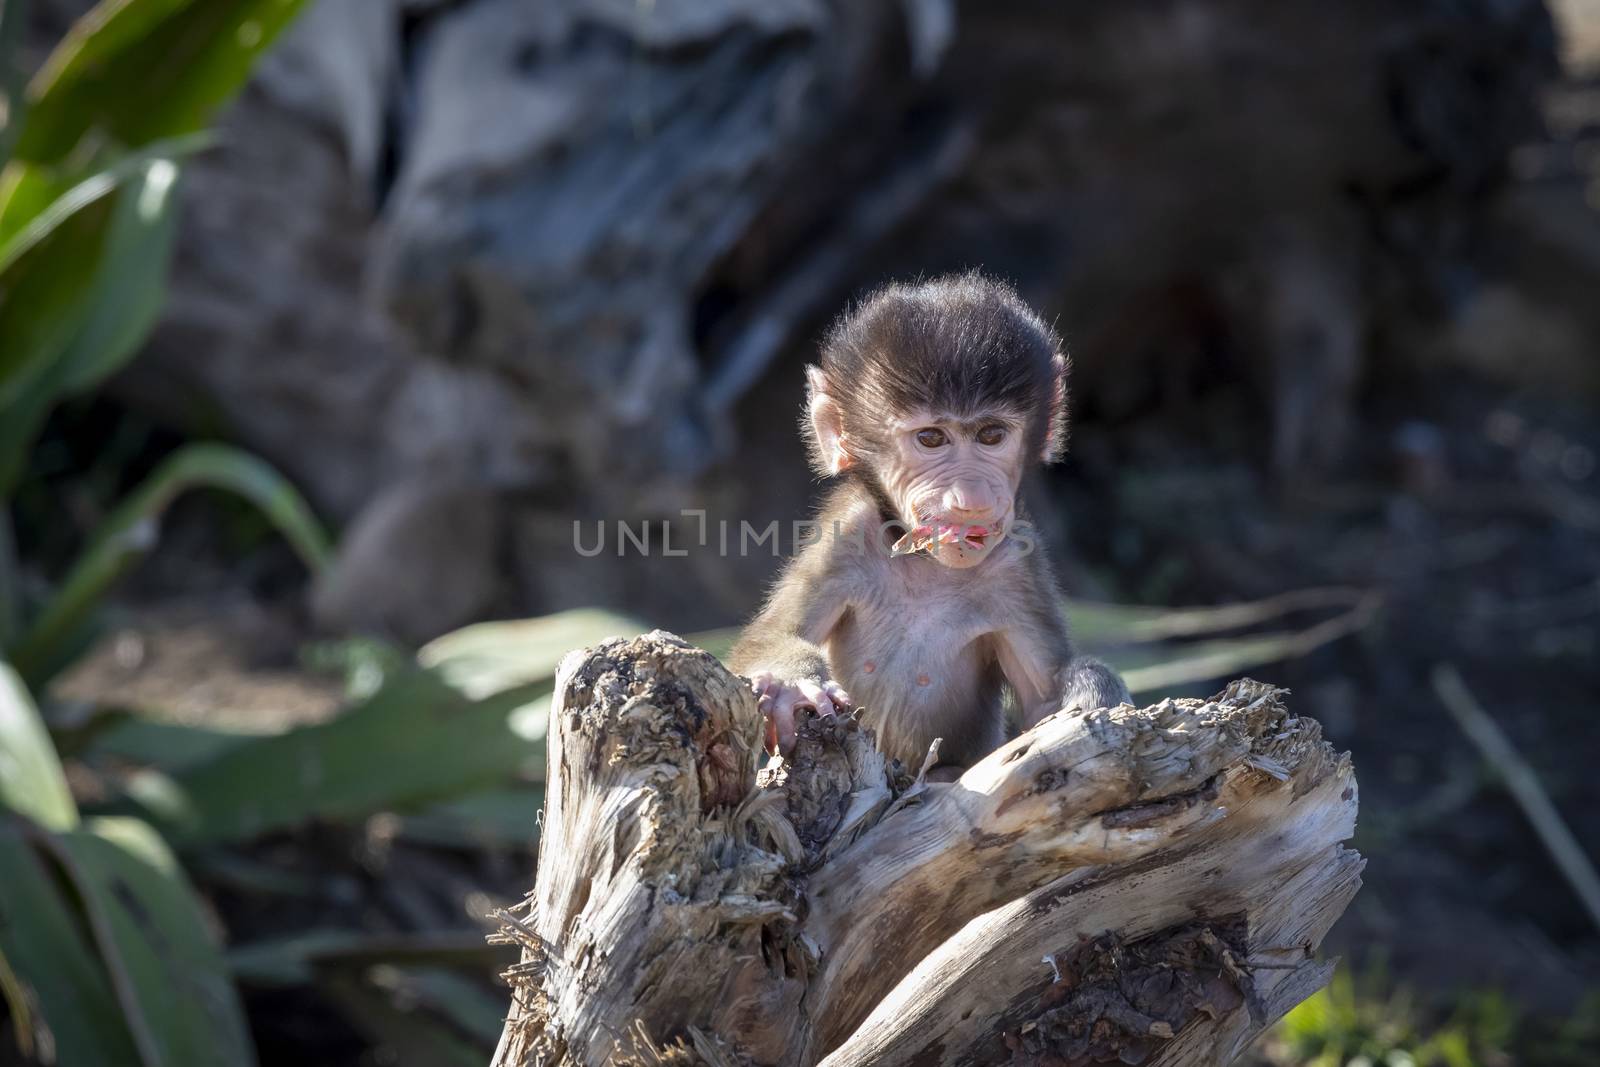 A baby Hamadryas Baboon playing outside on a fallen tree branch by WittkePhotos